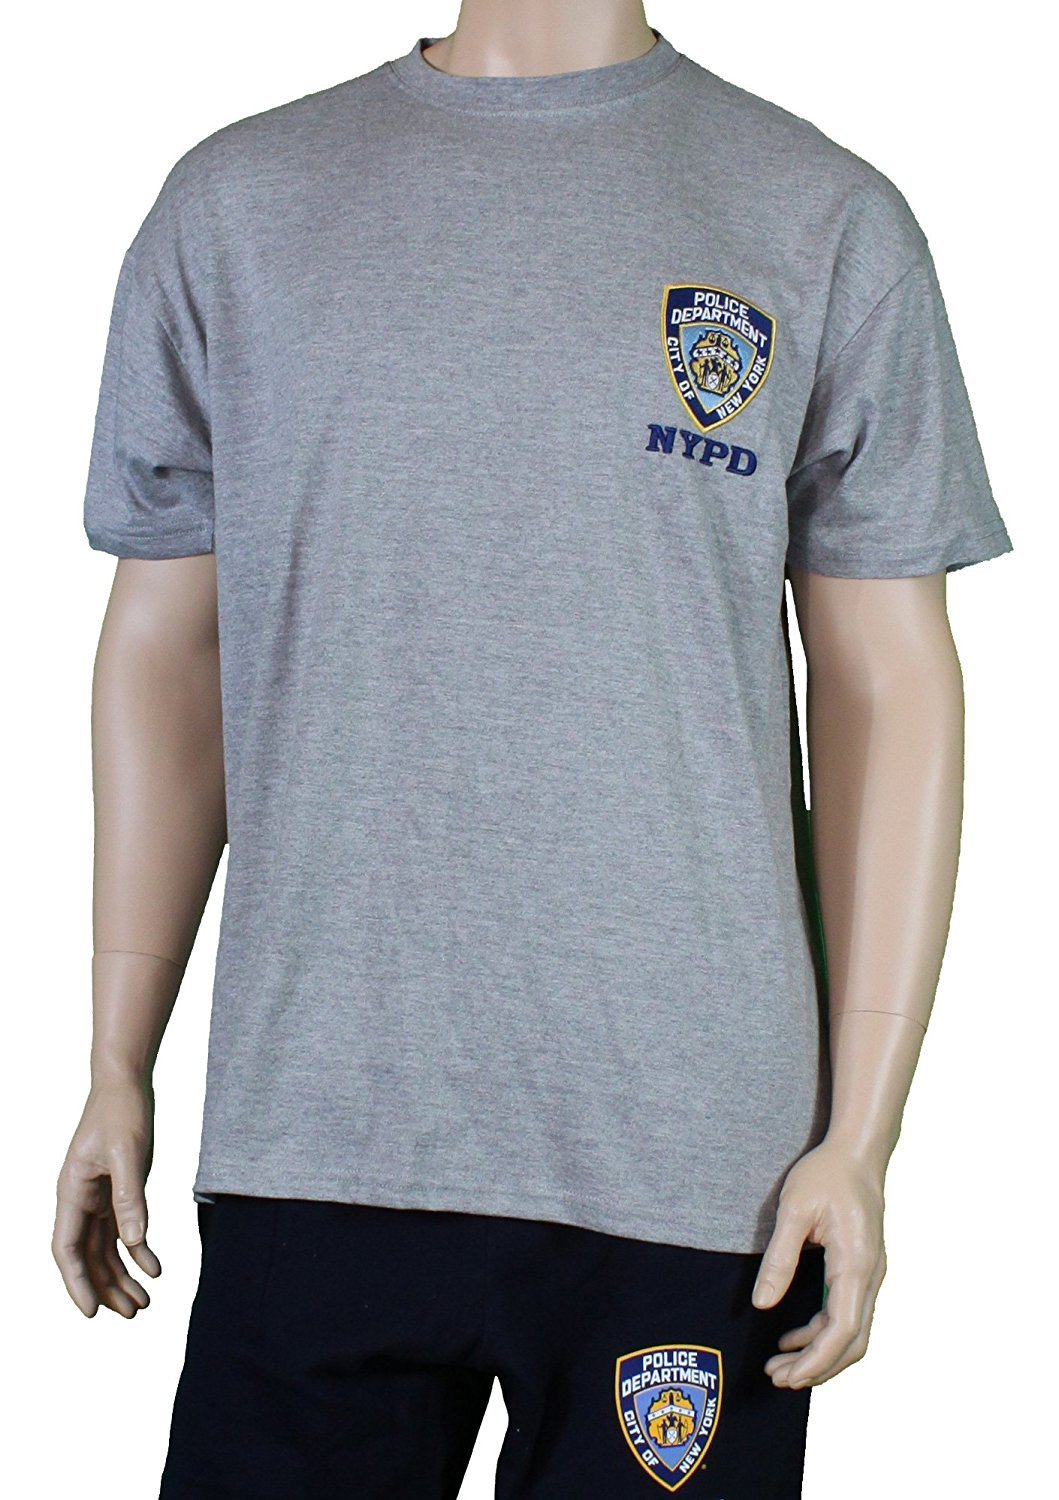 NYPD Men's T-Shirt (Embroidered Chest Design, Heather Gray)